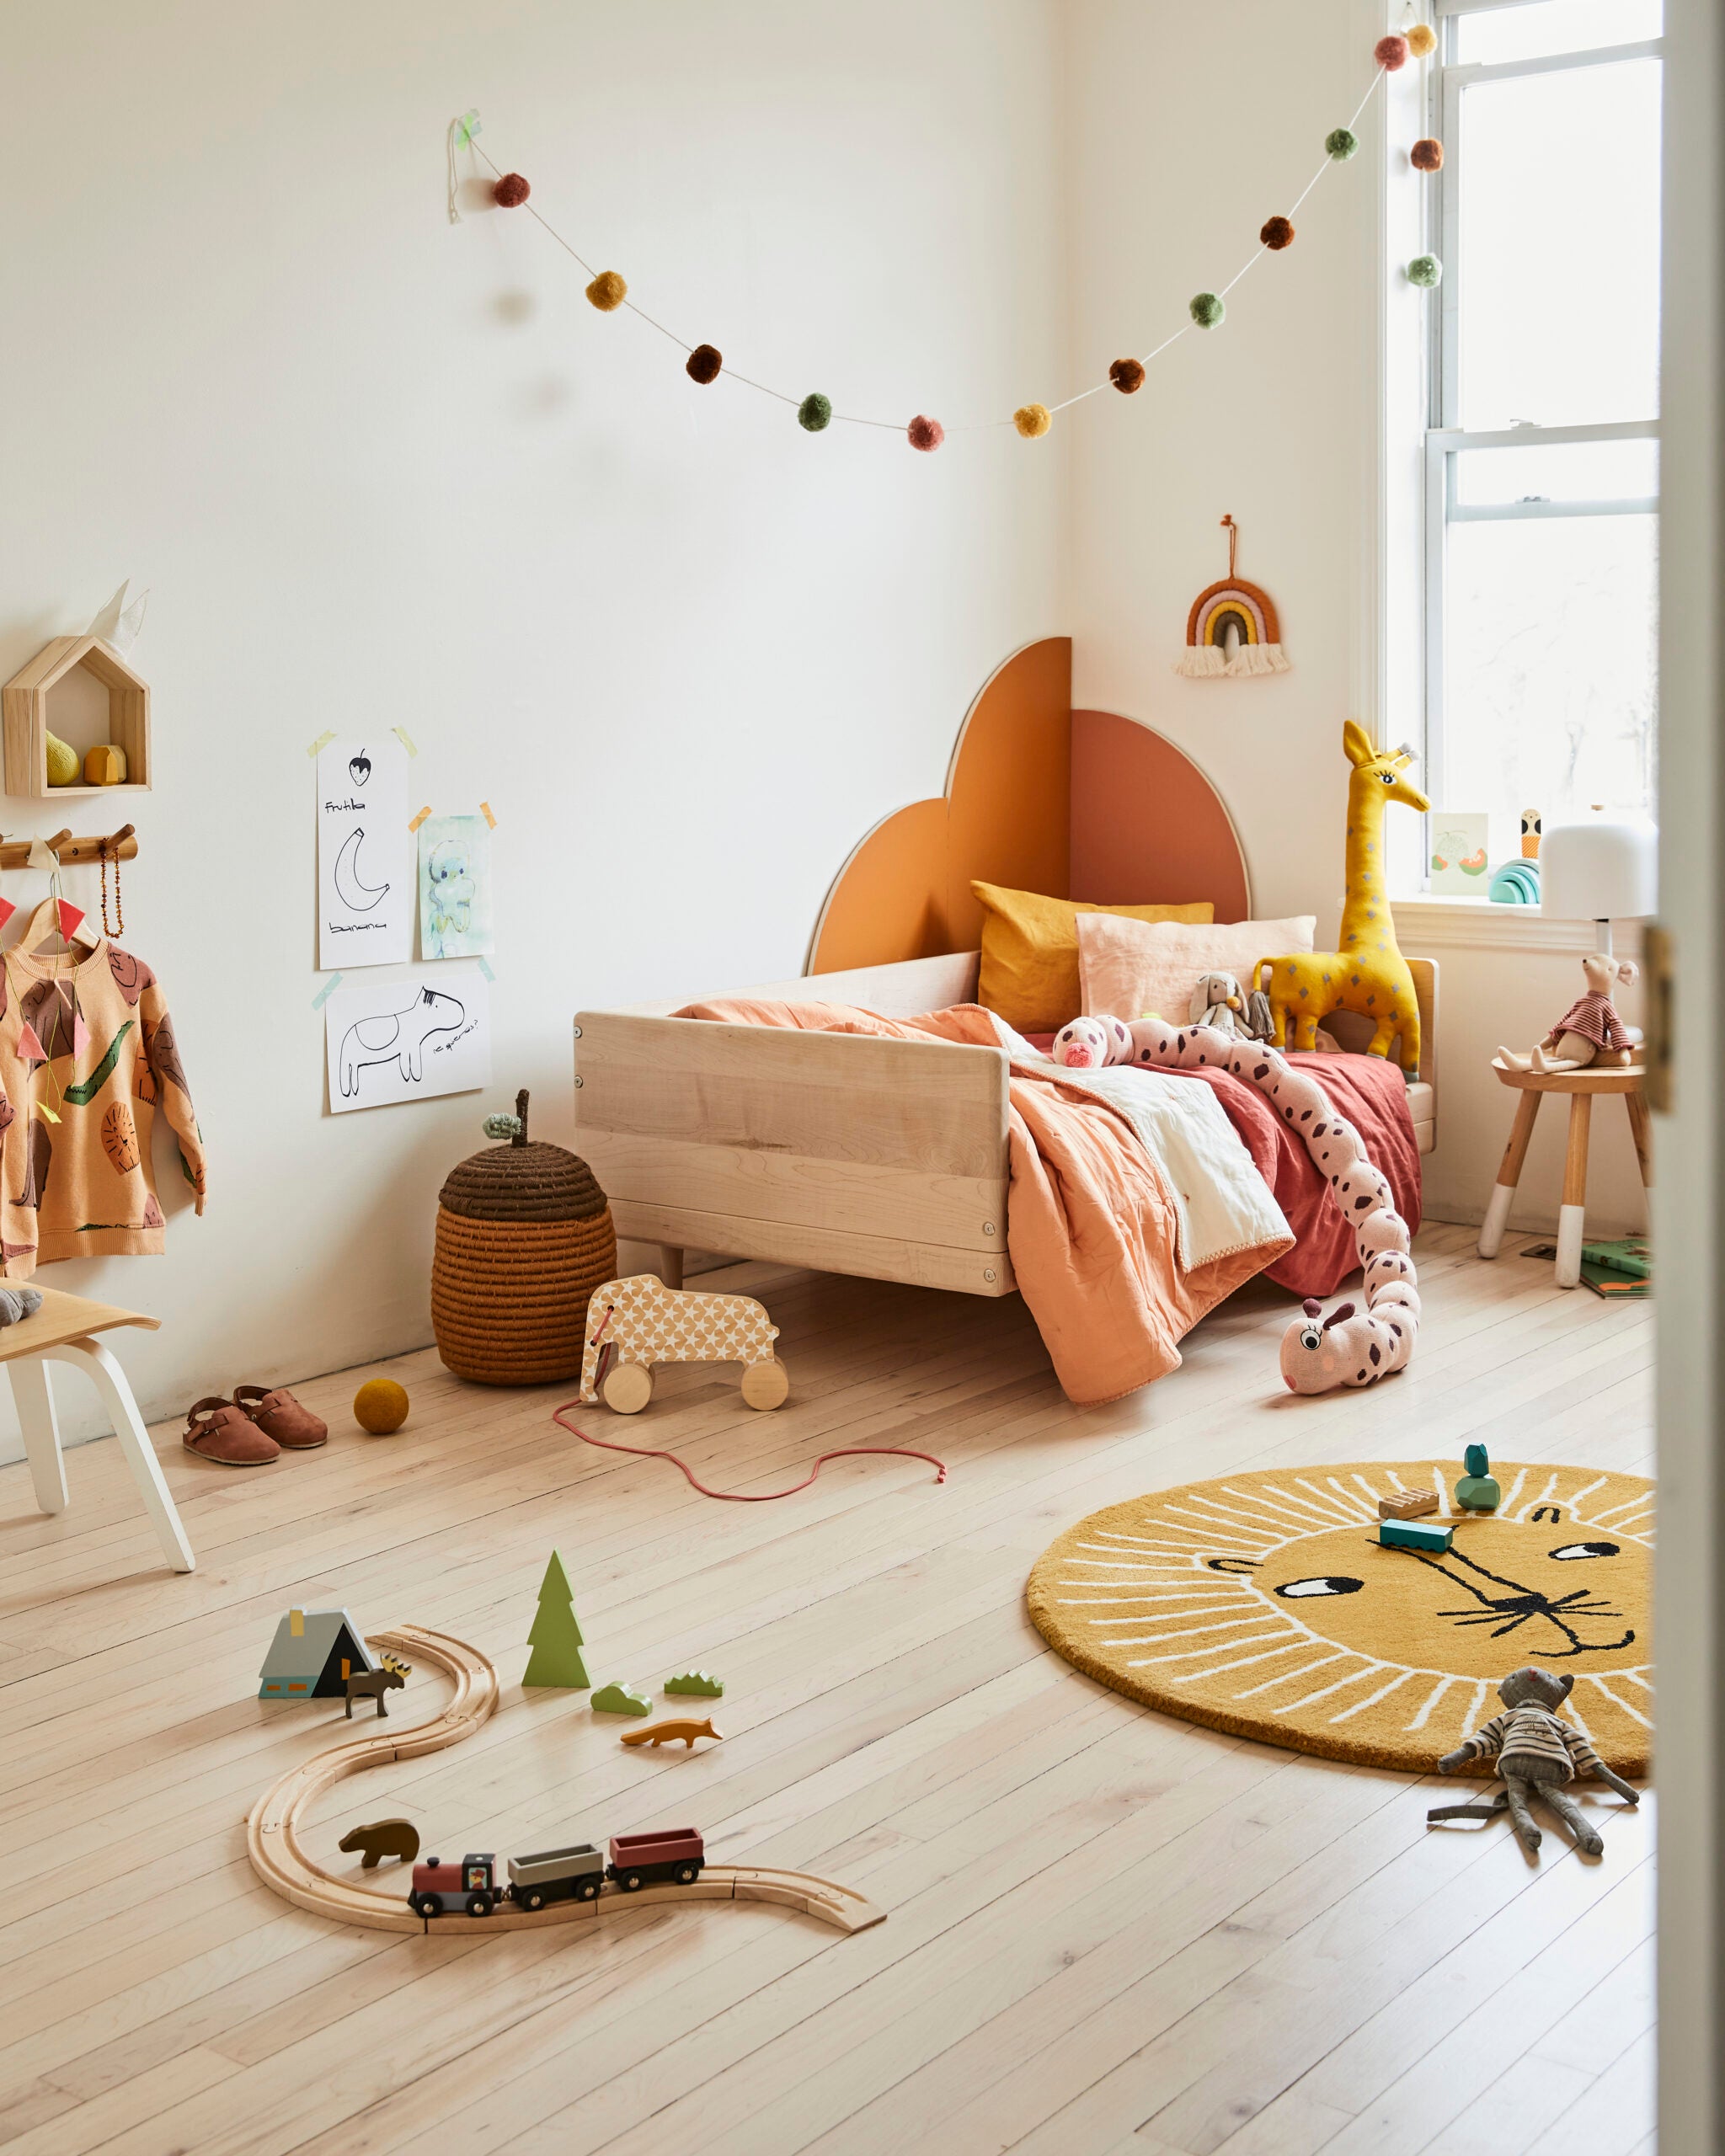 kid’s room with orange arches behind bed and toys on floor